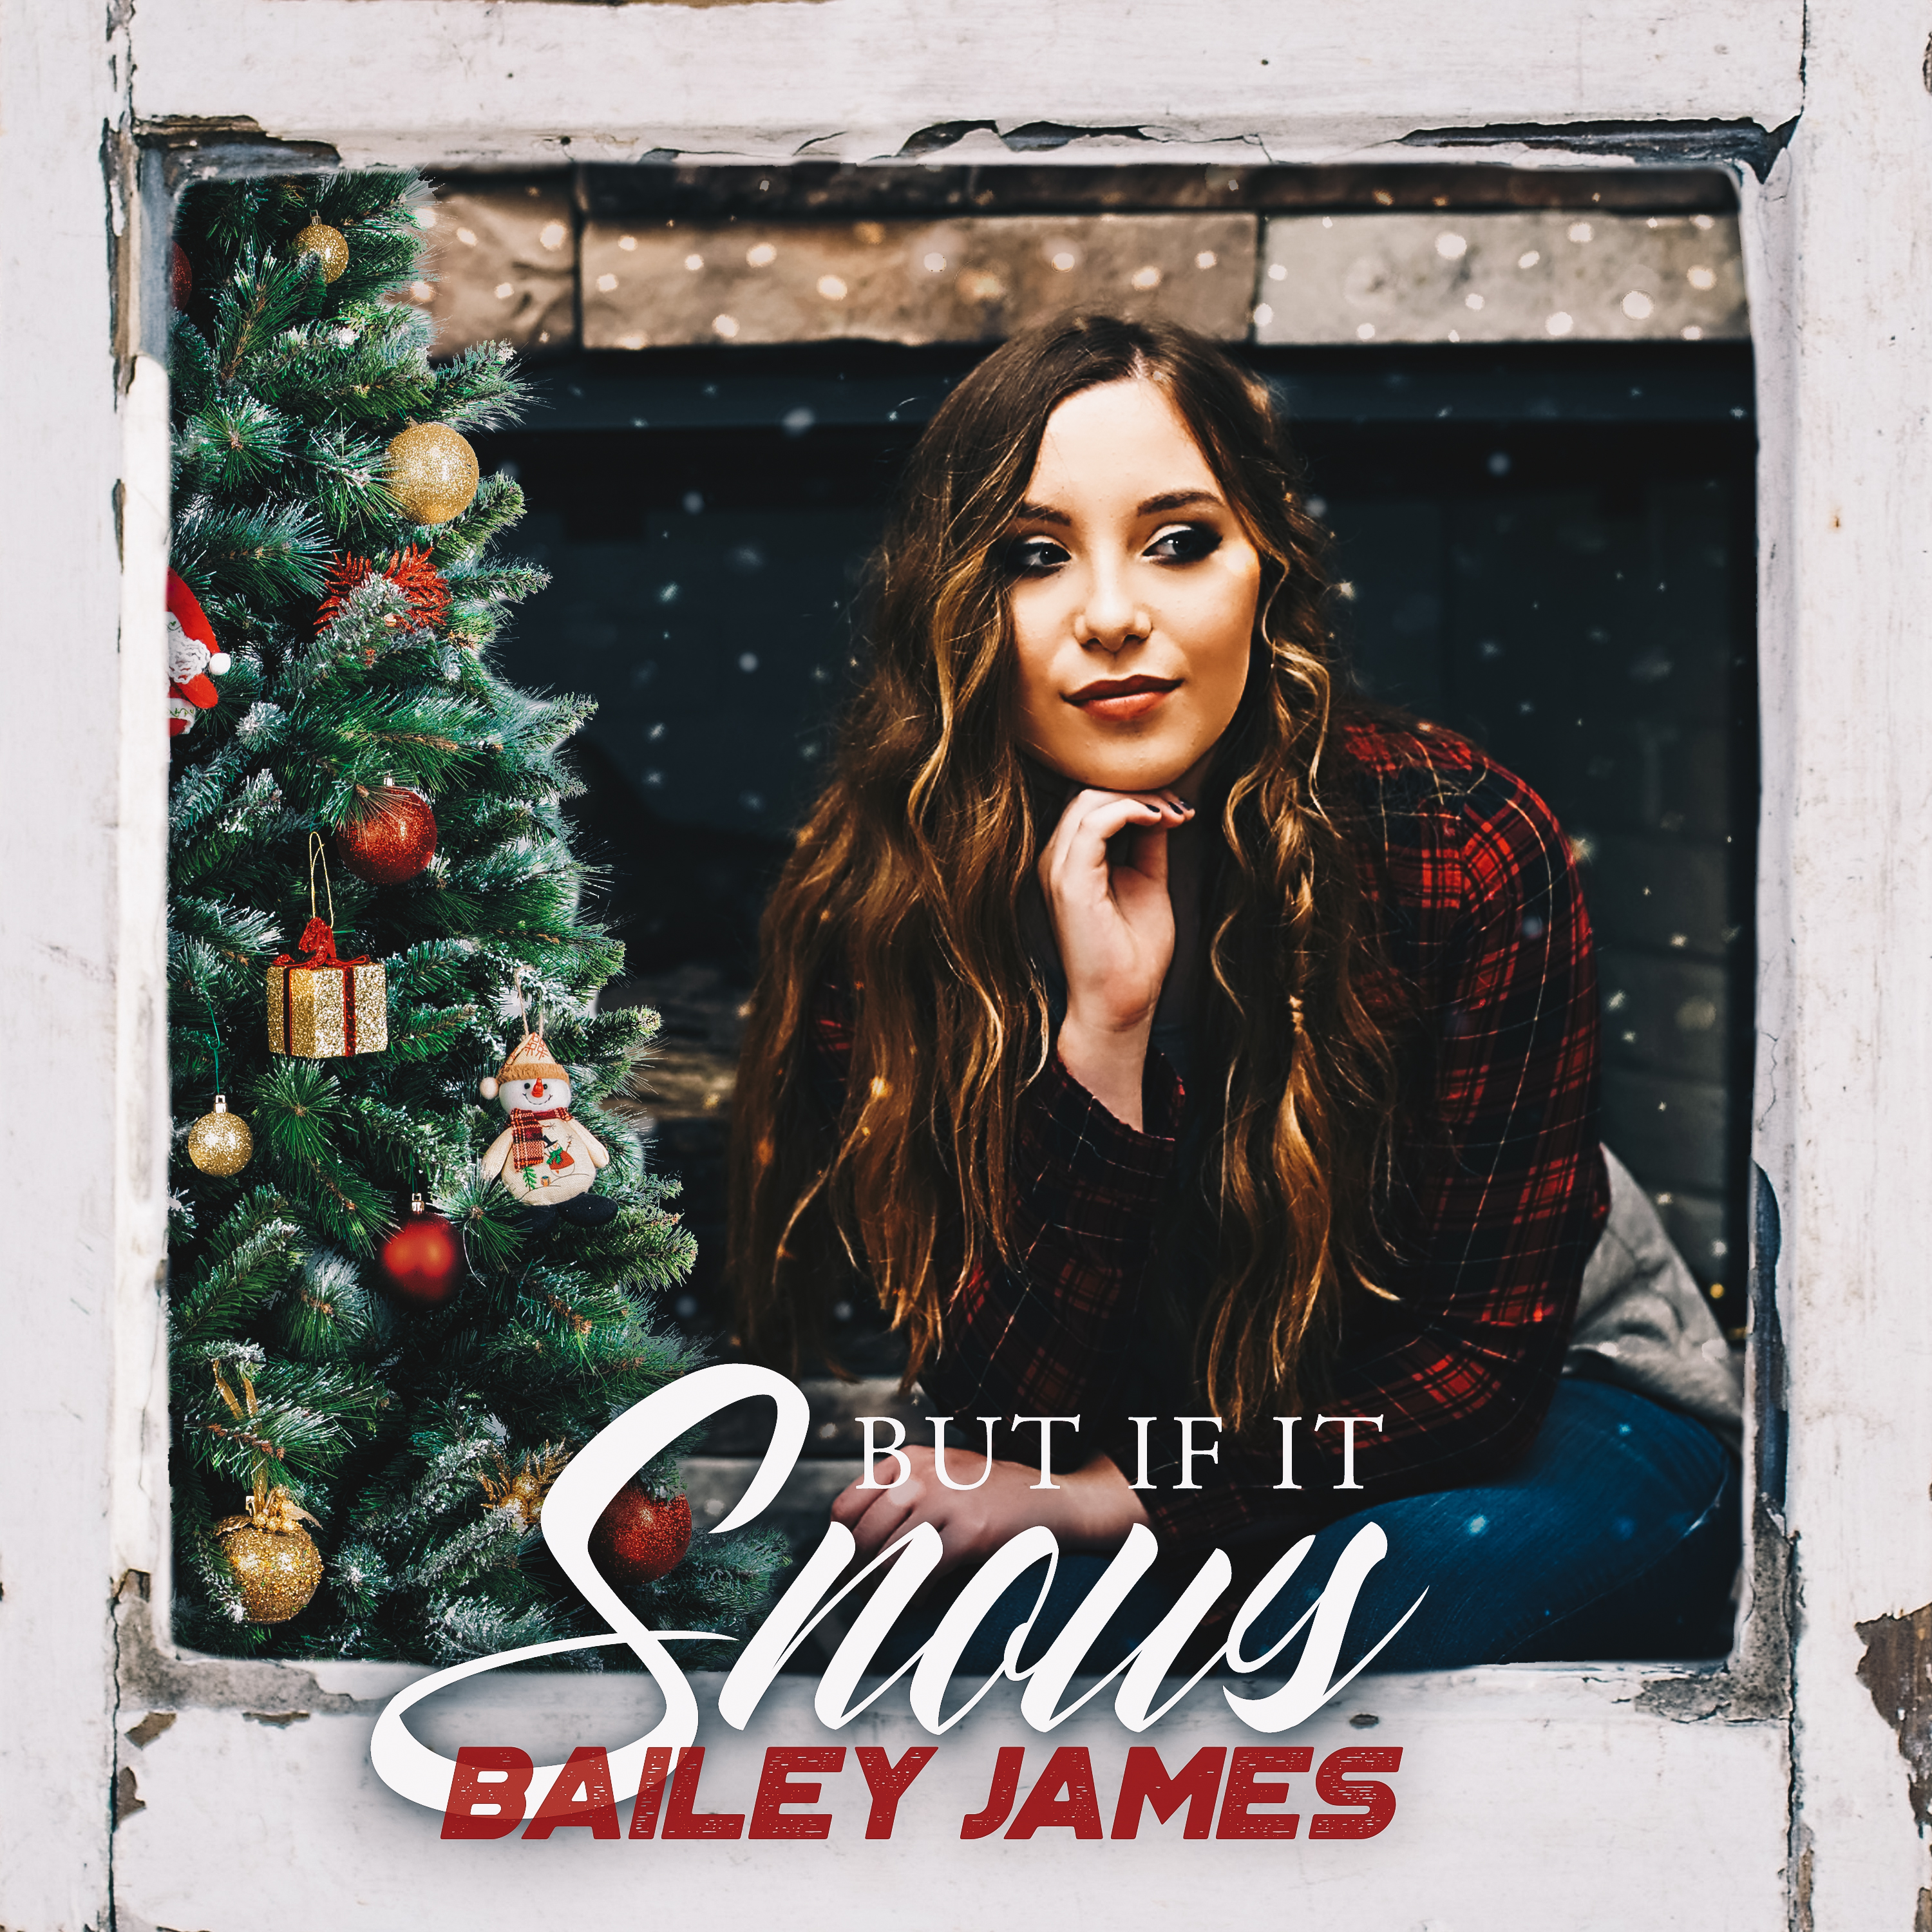 Bailey James Gets Us in the Holiday Spirit with Music Video for “But If It Snows” (Premiere)